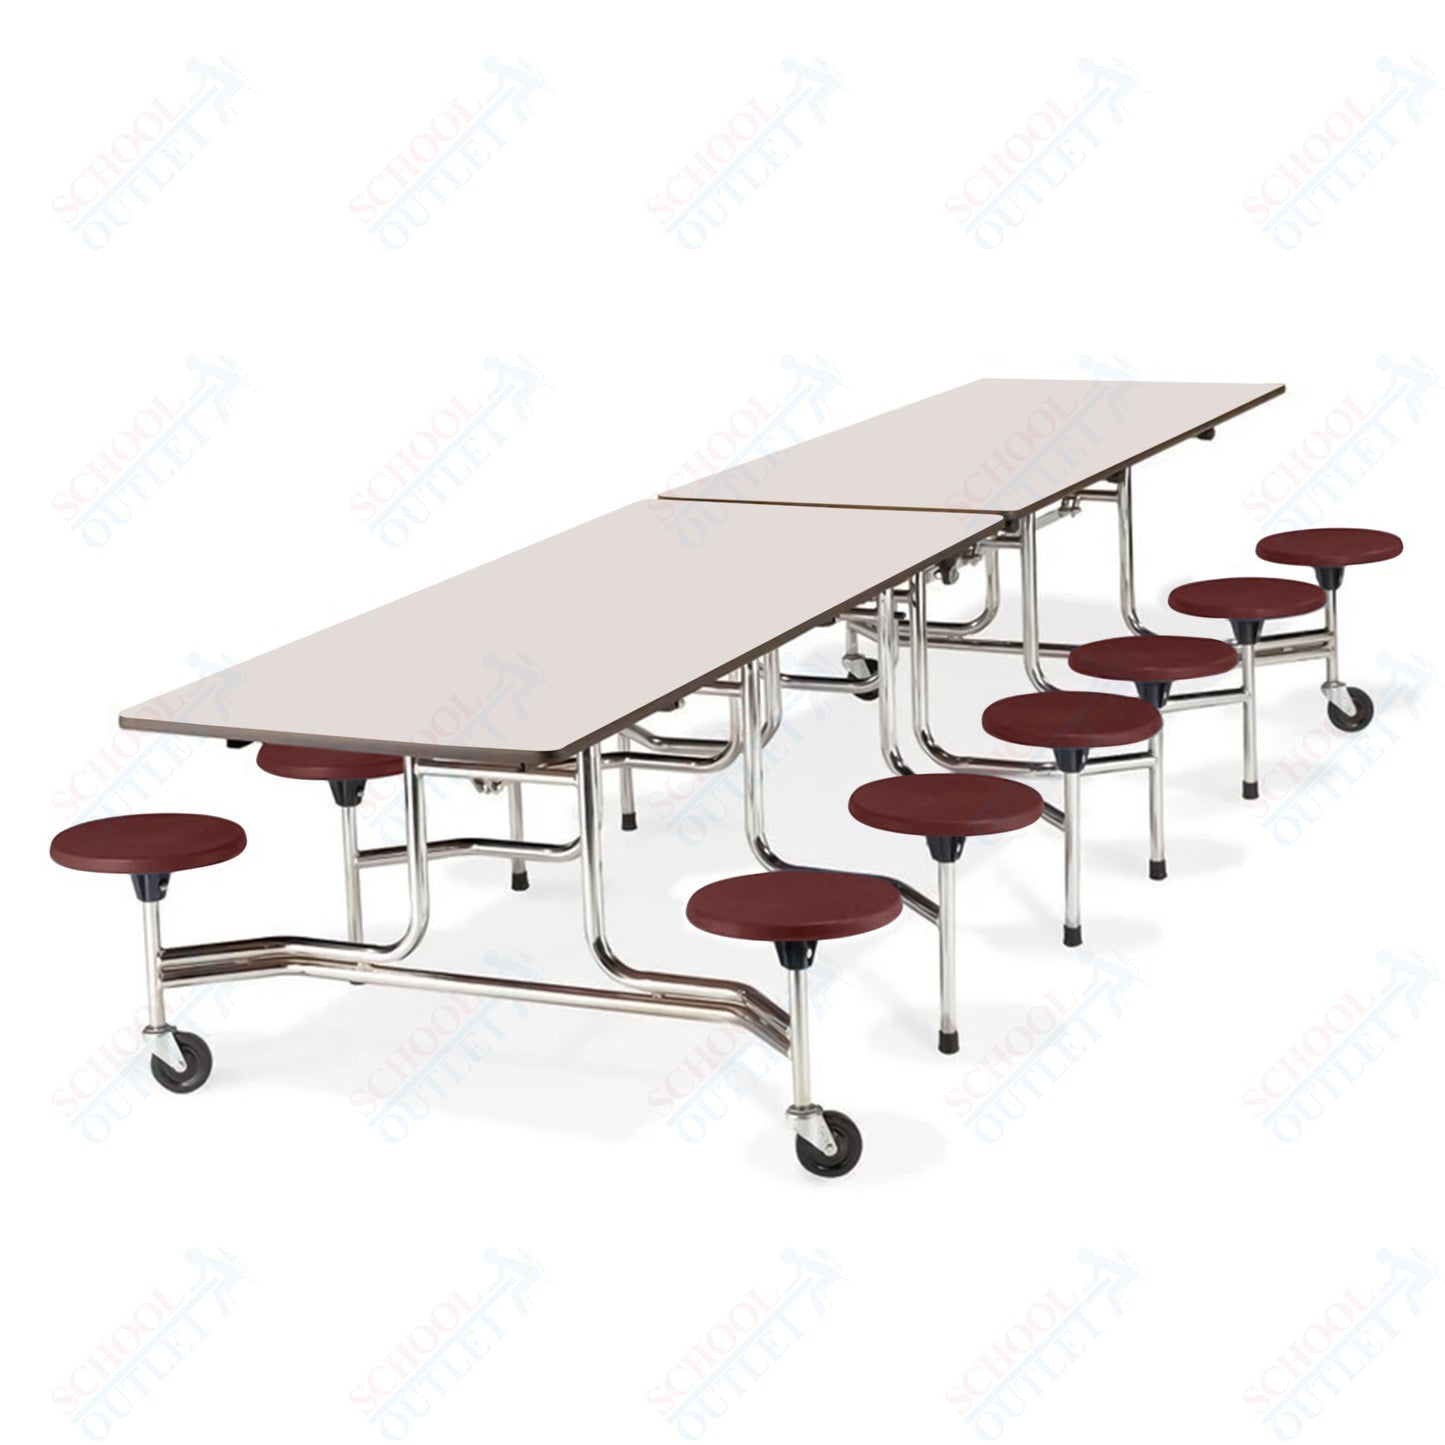 Virco MTS19311212W - ADA Compliant Rectangle Mobile Stool Cafeteria Table - T-mold Edge - 19" Seat Height - 12.5'L - 12 Stools